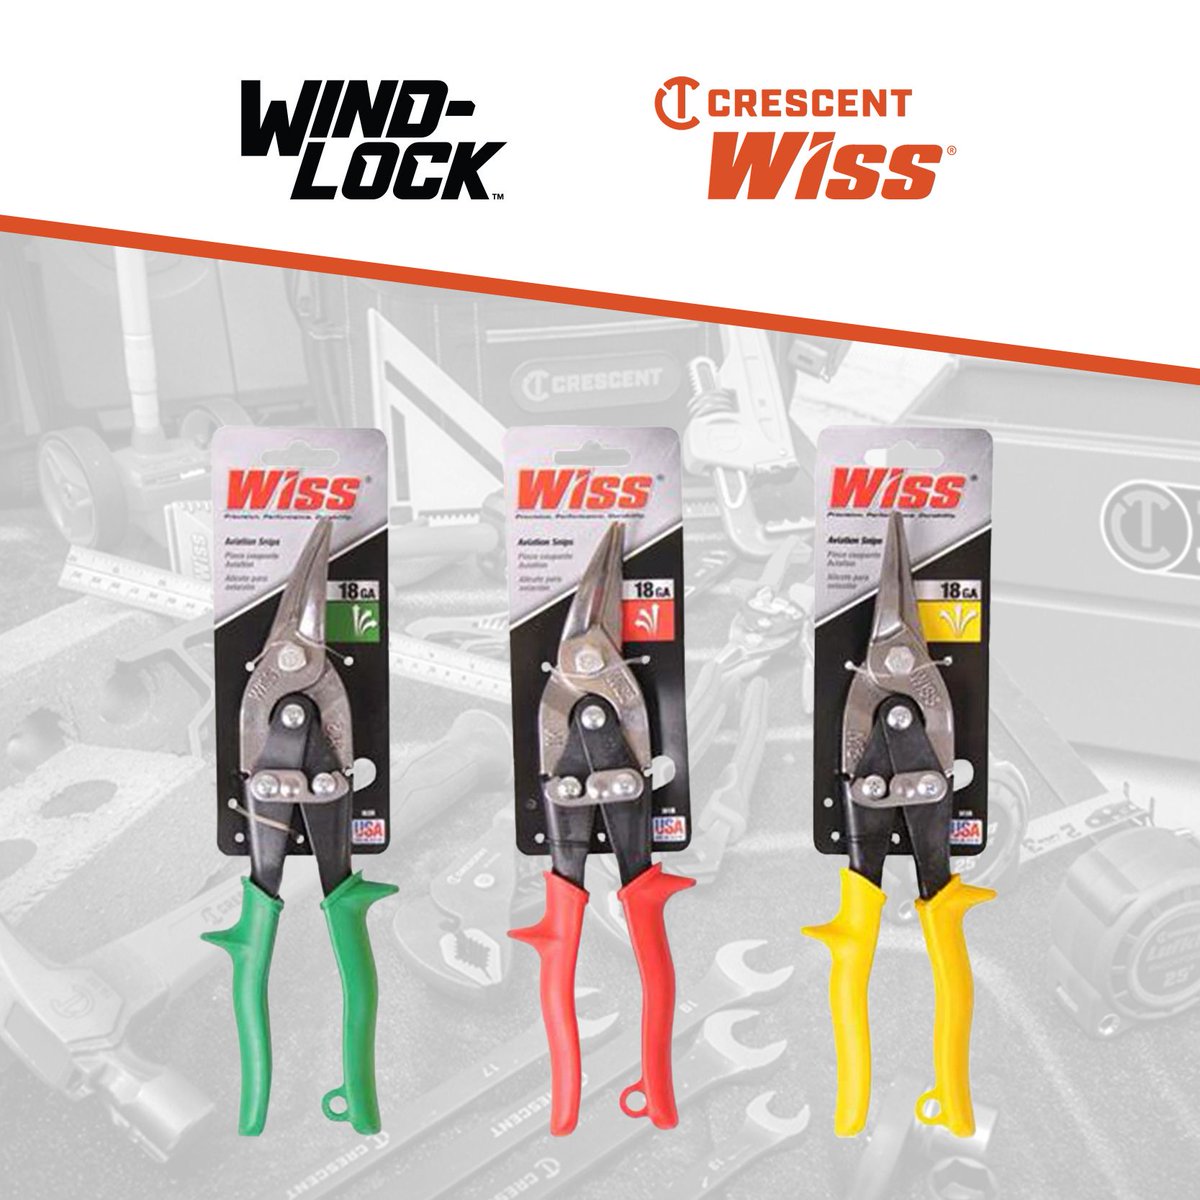 Crescent Wiss Aviation Snips are well-known in the construction
world for representing quality and craftsmanship.
Shop Wiss Snips: buff.ly/4bug8Cd 

#Snips #AviationSnips #Wiss #CrescentWiss #Construction #Tools #Toolsofthetrade #Windlock